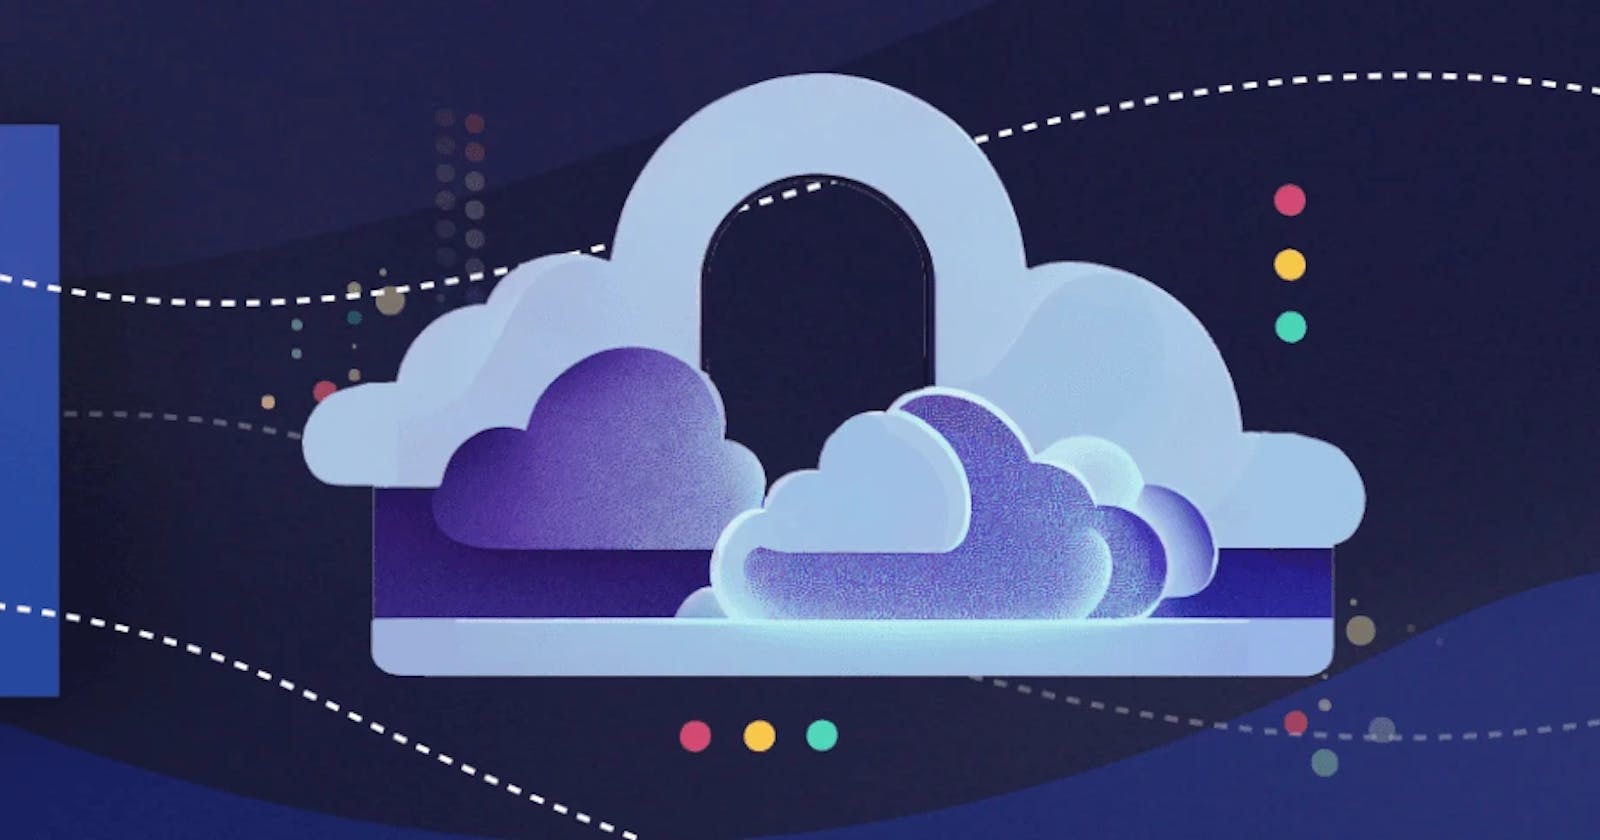 Announcing the 2022 State of Cloud Security report from Snyk